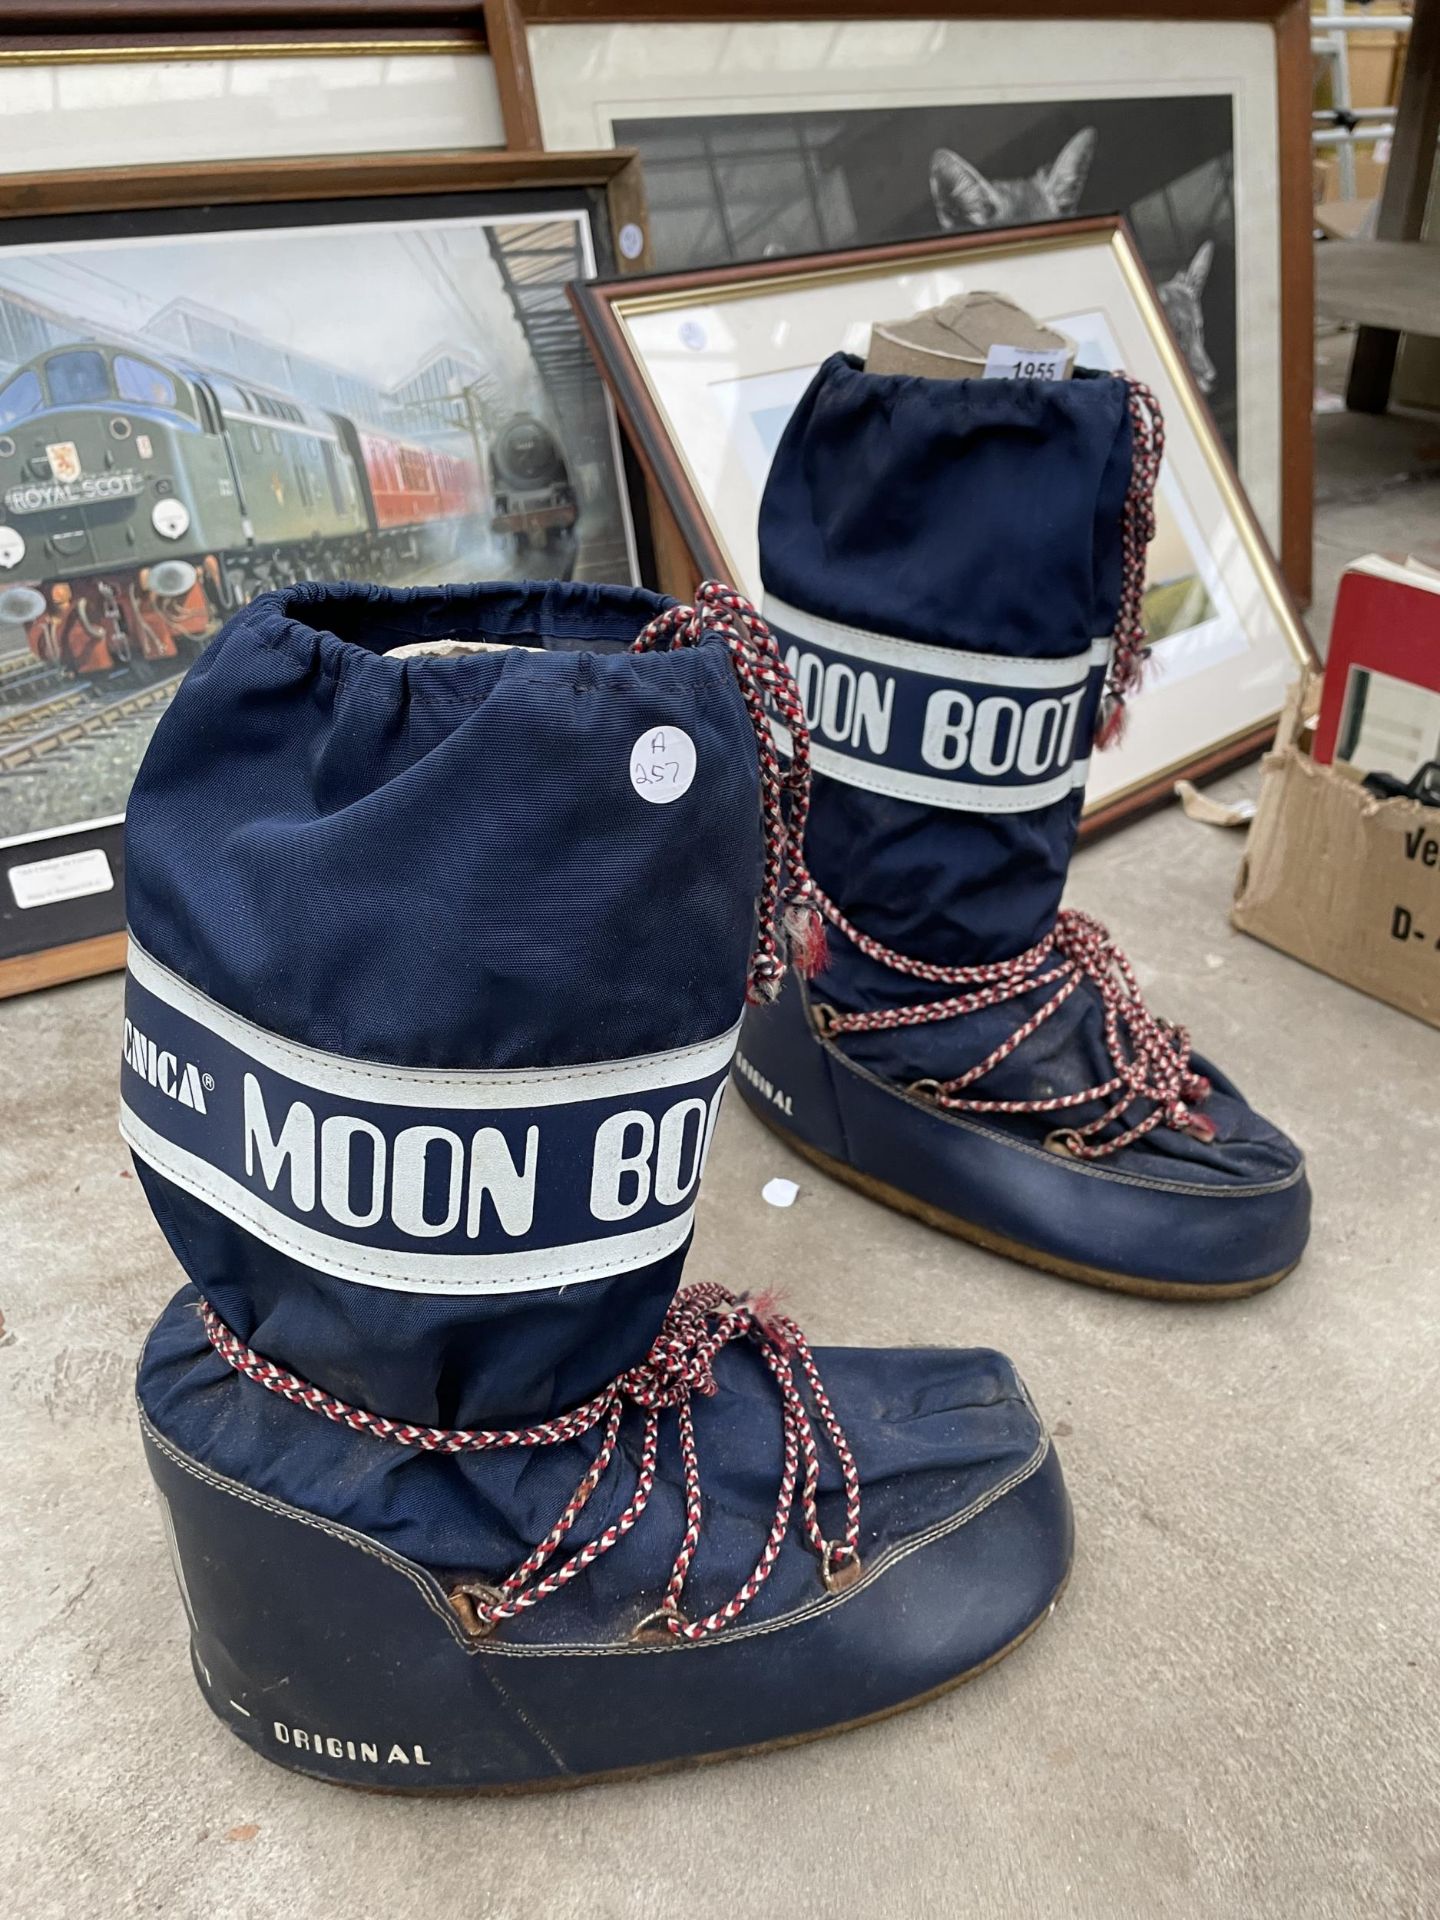 A PAIR OF MOON BOOTS - Image 2 of 2